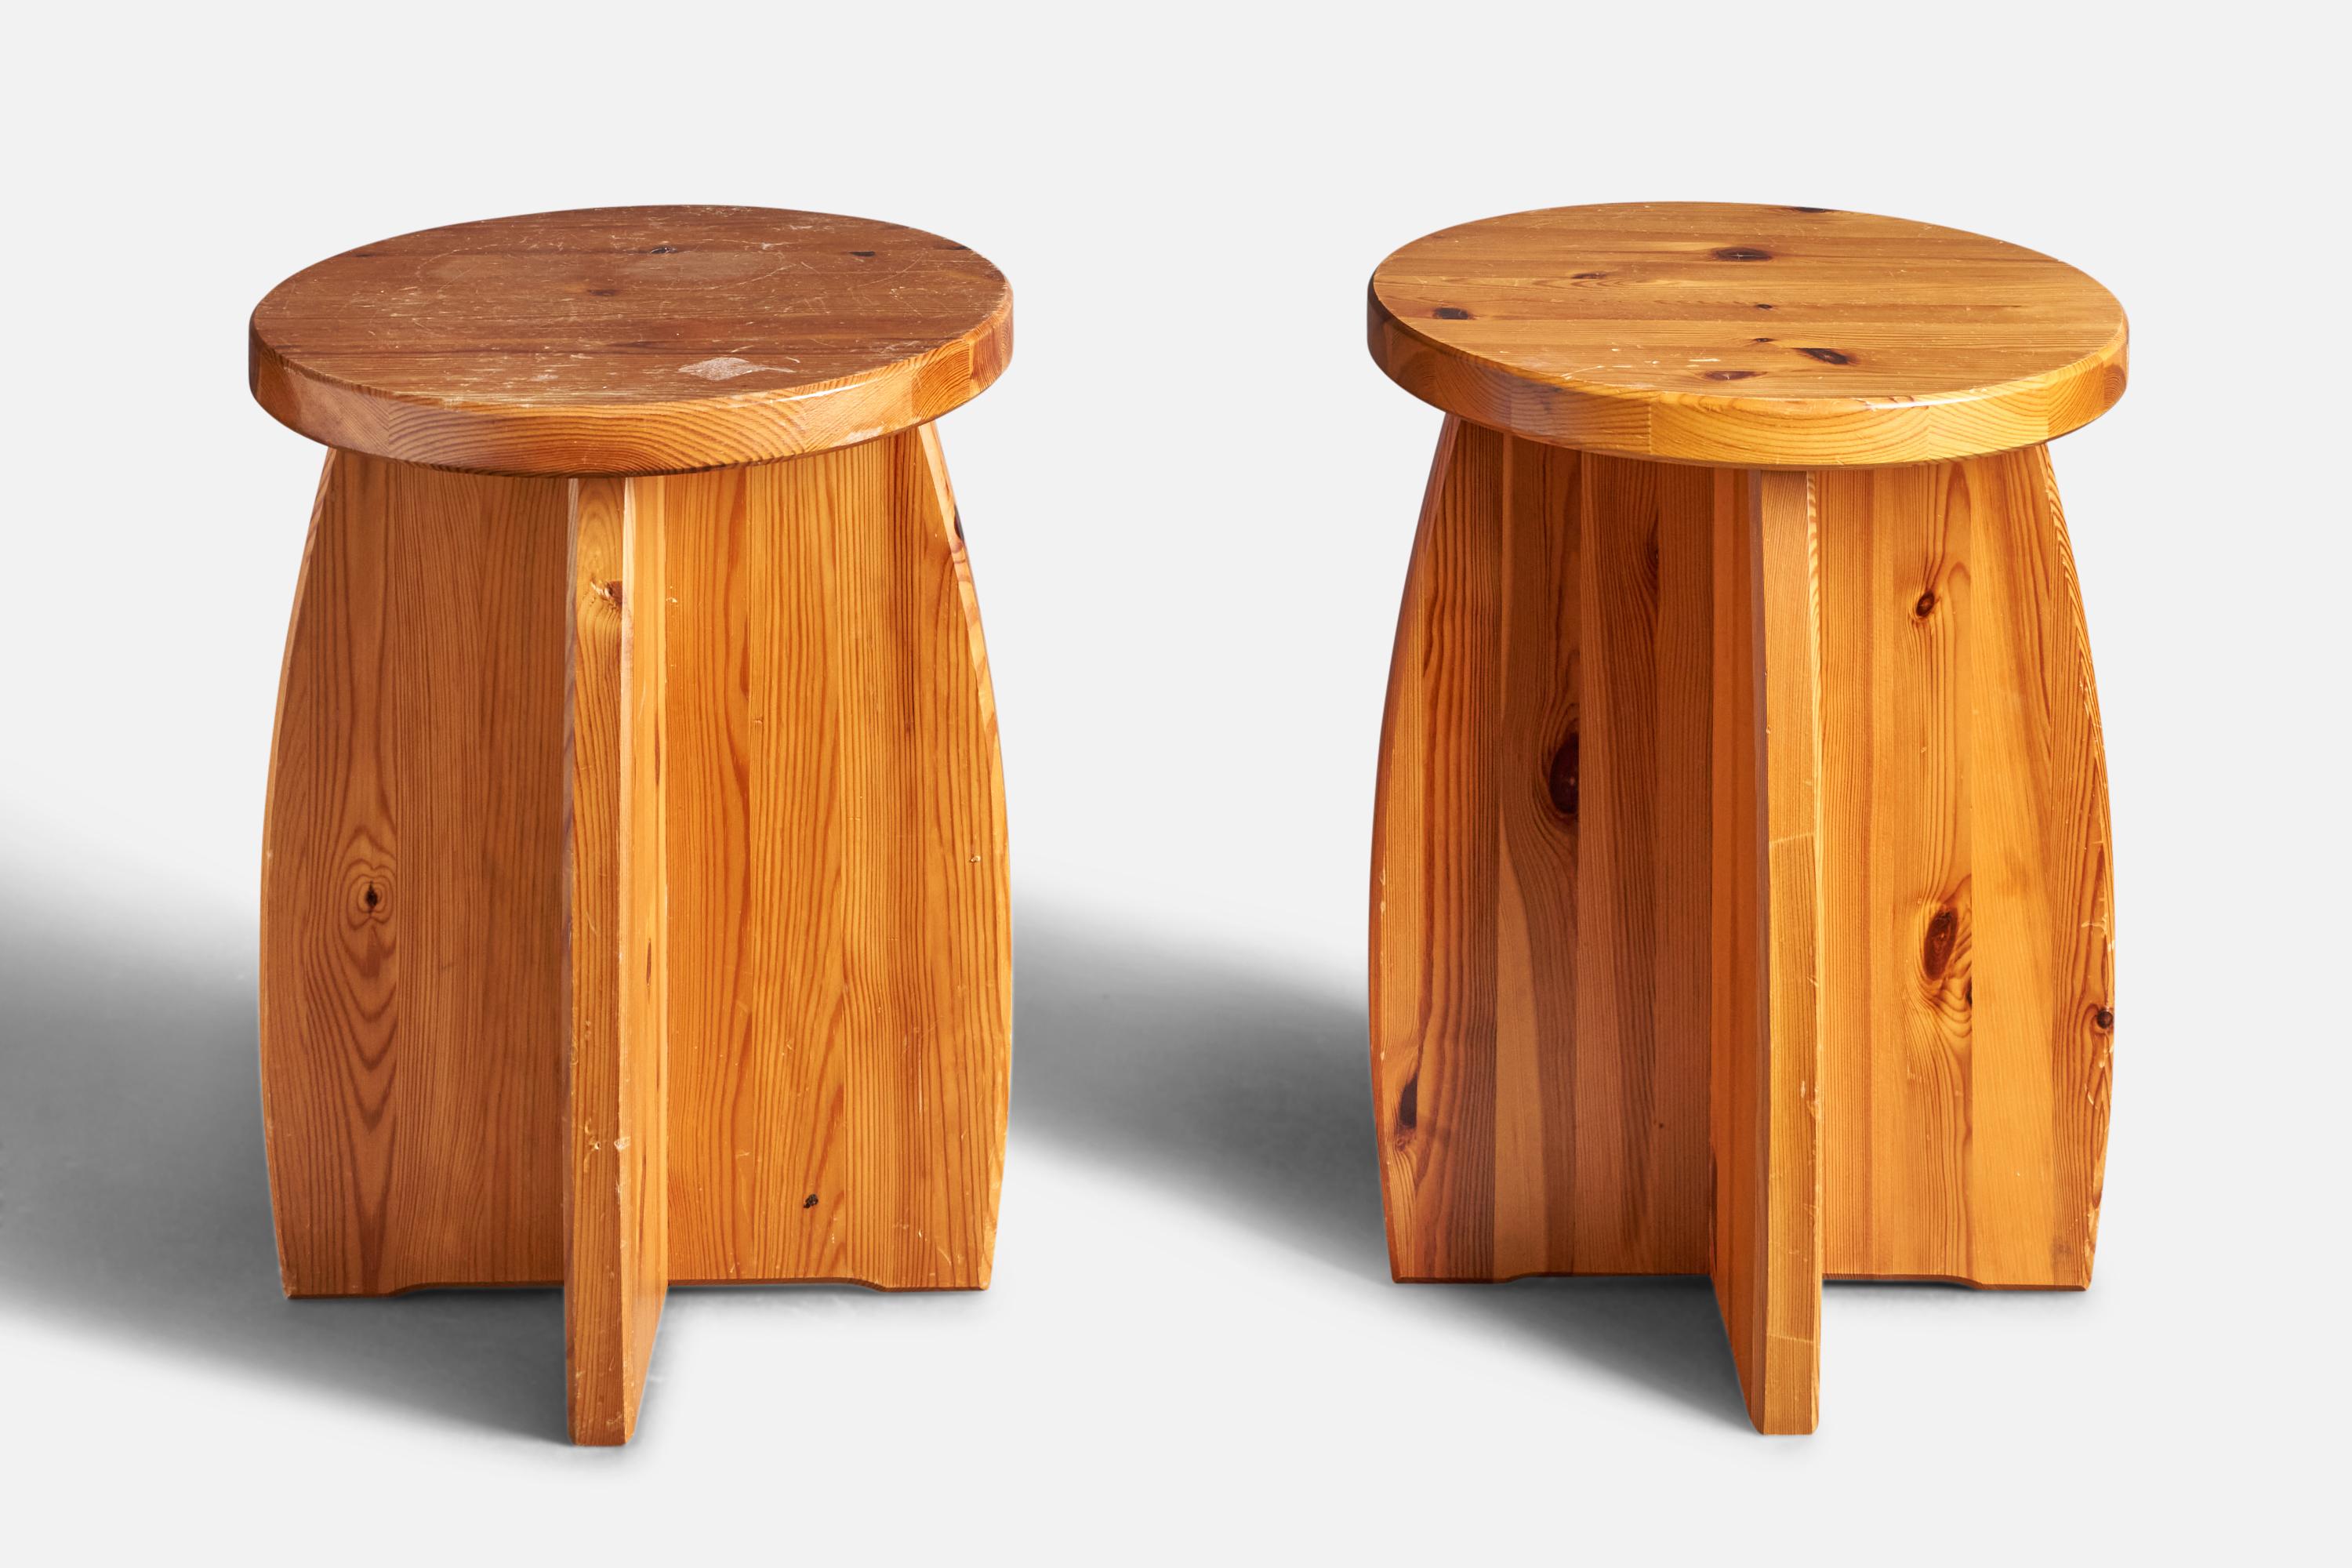 A pair of solid pine stools, designed and produced in Sweden, c. 1970s.